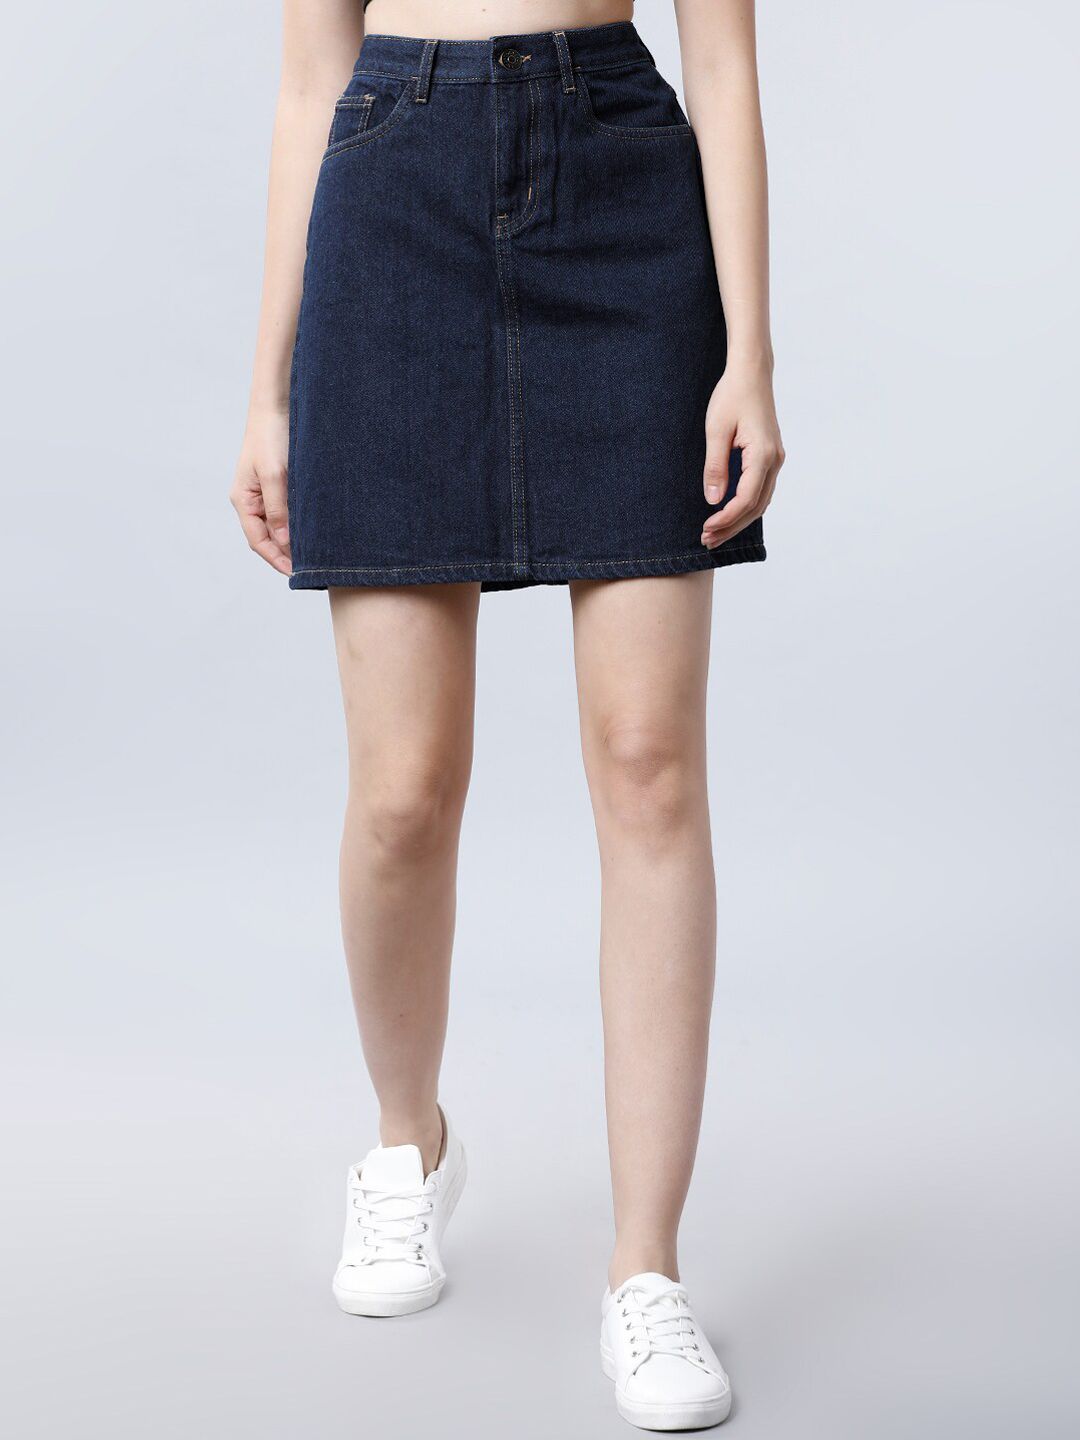 Tokyo Talkies Navy Blue A-Line Pure Cotton Skirt Price in India